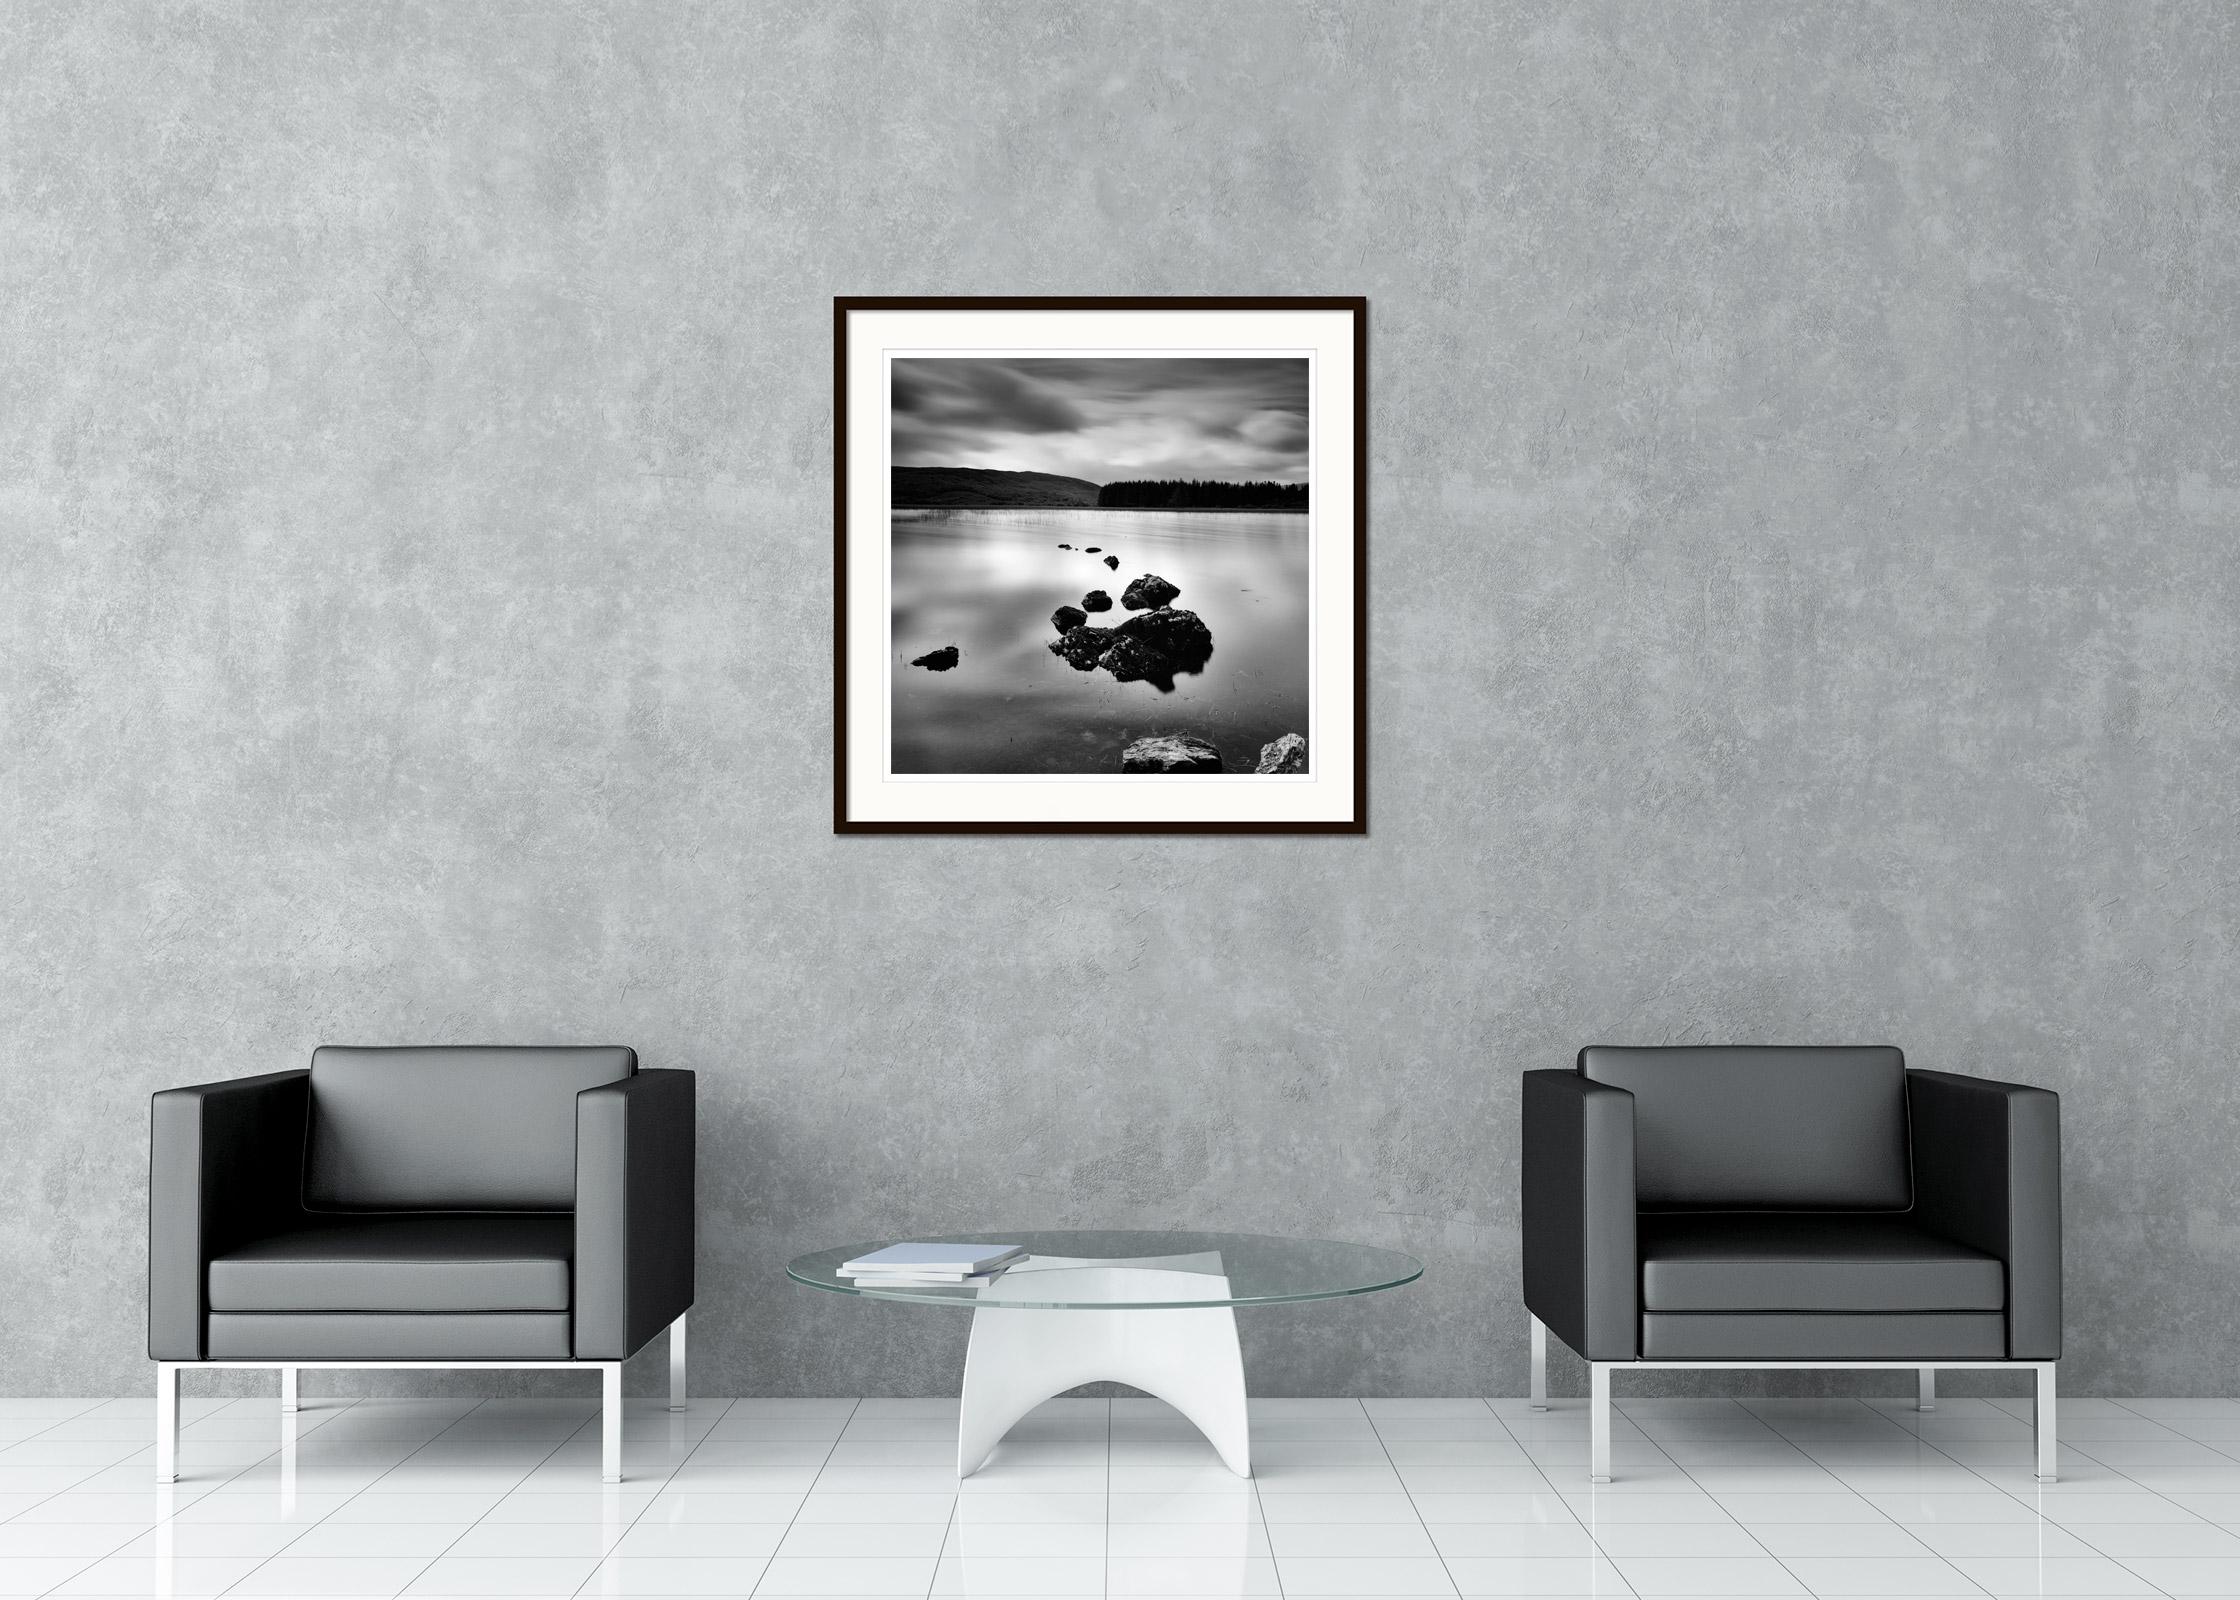 Black and White Fine Art long exposure waterscape Photography. Mountain lake in the highlands of Scotland. Archival pigment ink print, edition of 9. Signed, titled, dated and numbered by artist. Certificate of authenticity included. Printed with 4cm